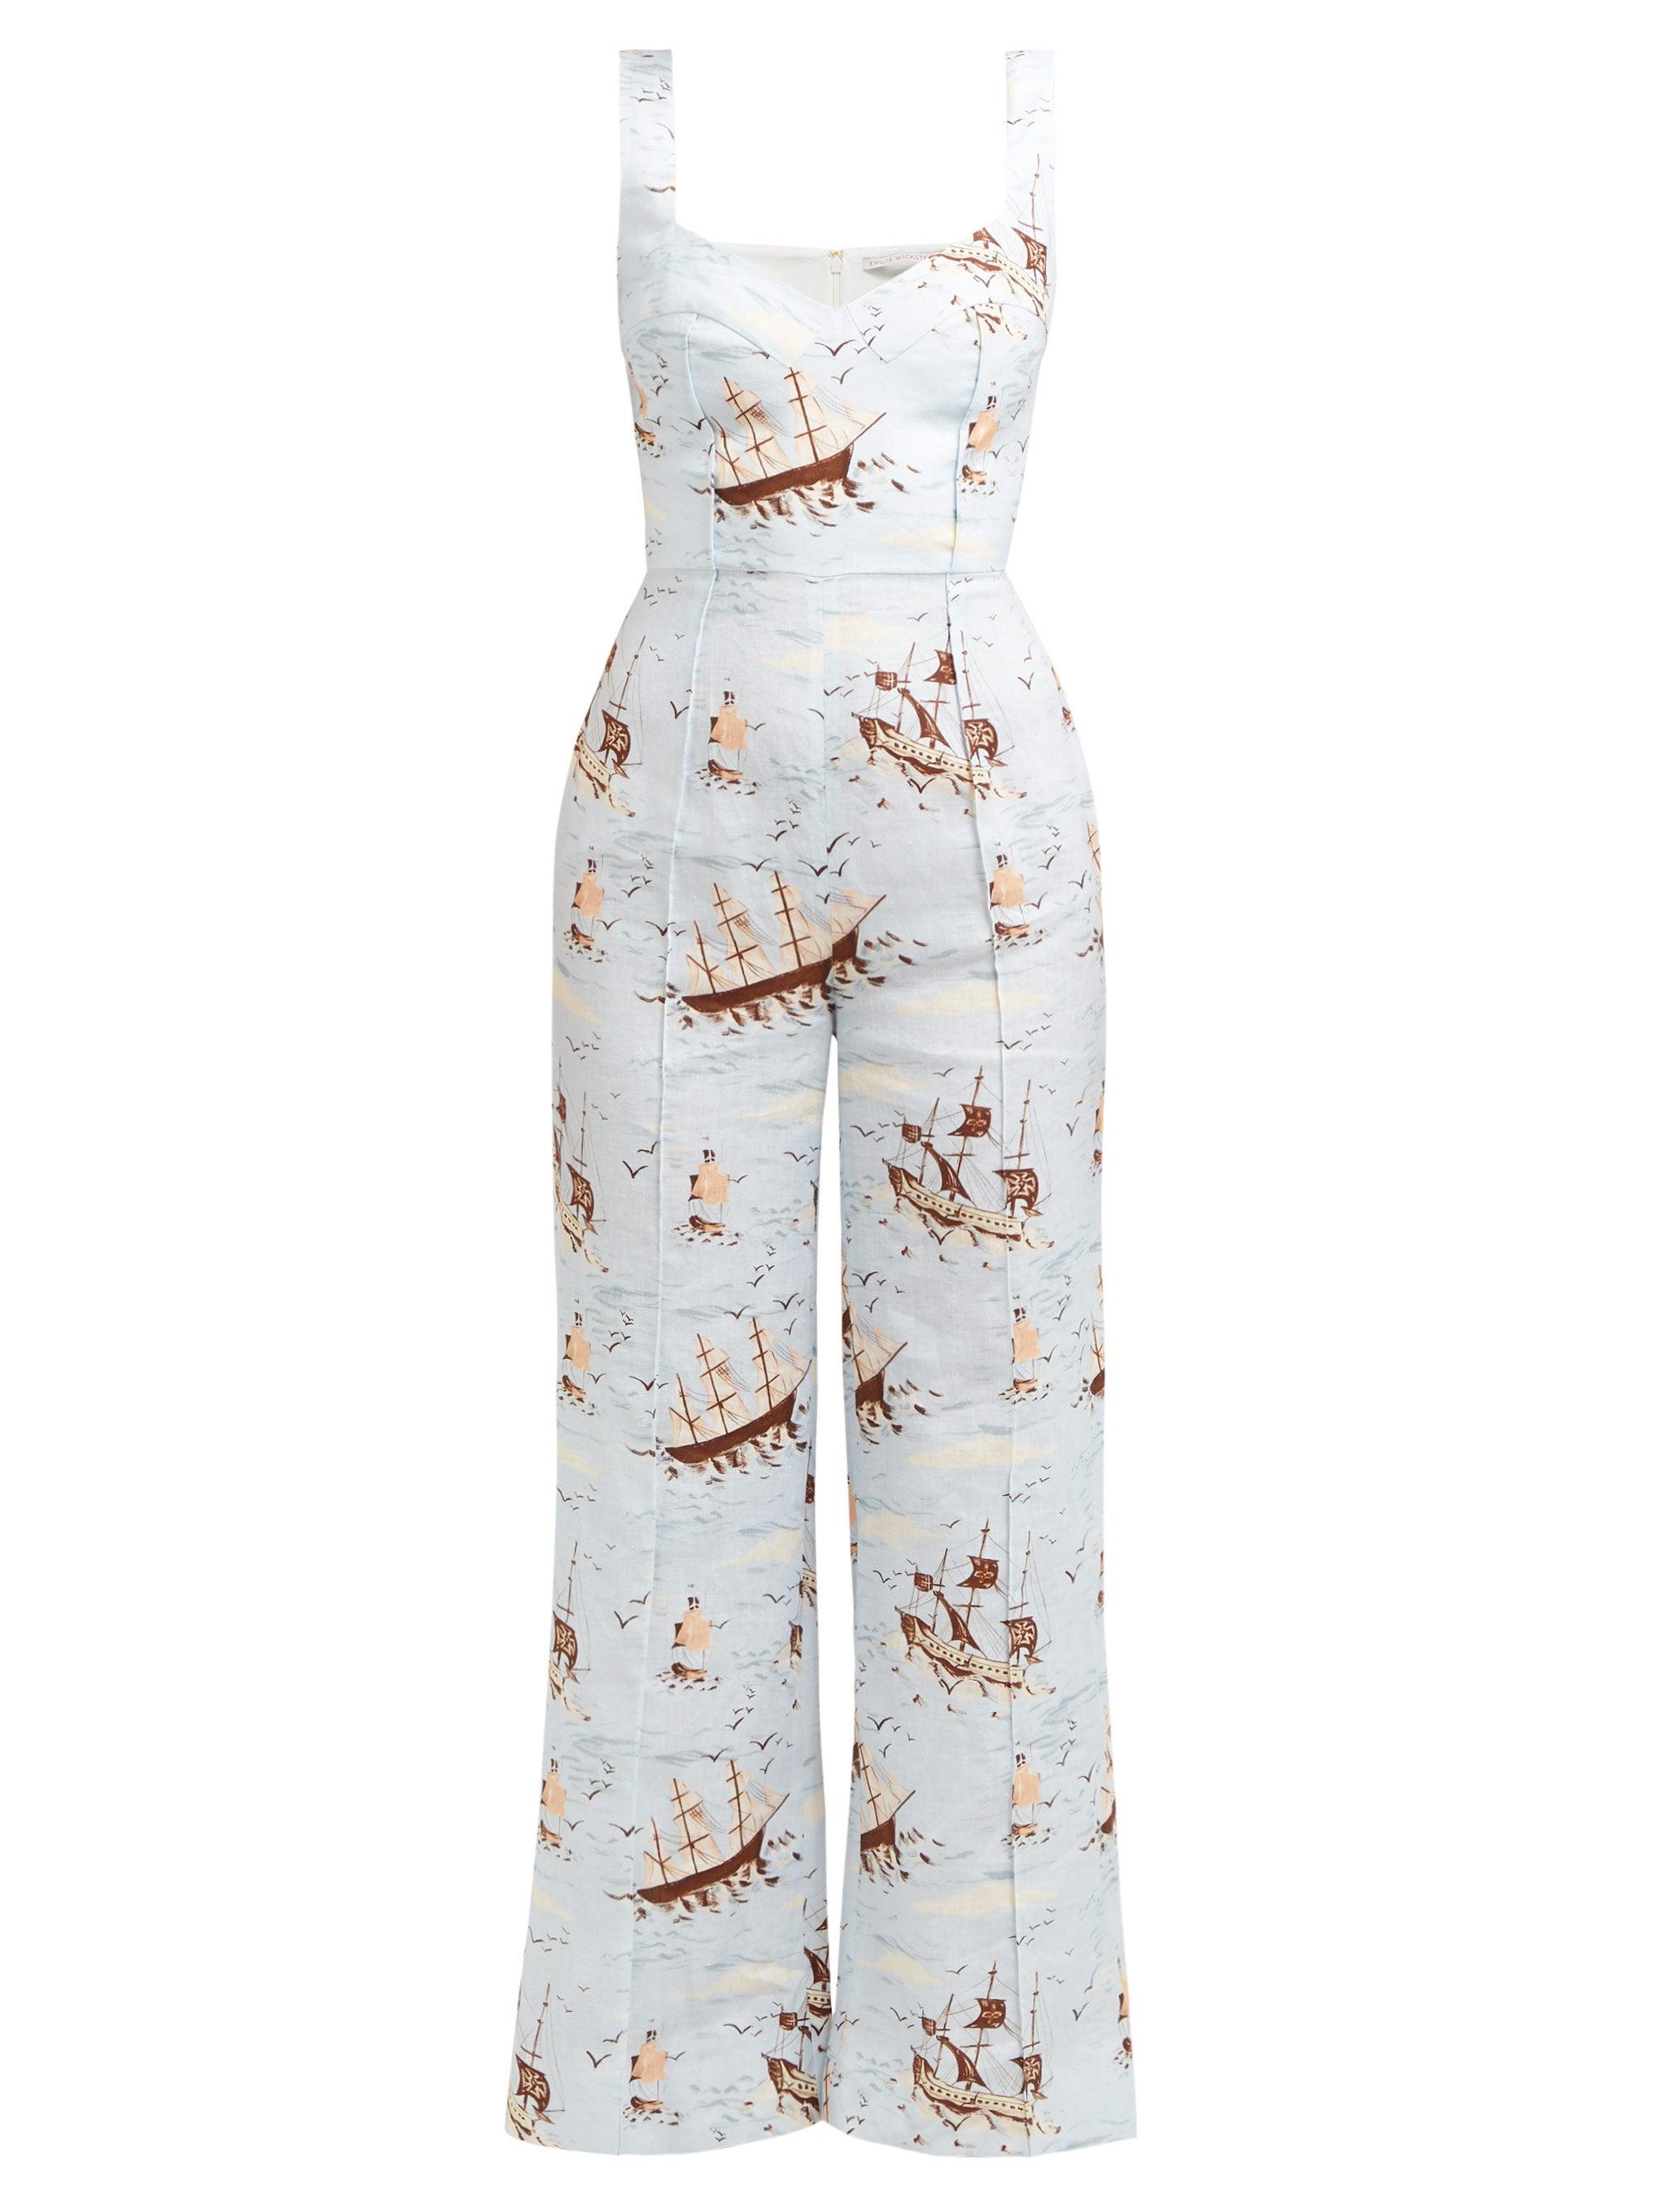 layla light blue and rose gold floral print midi dress